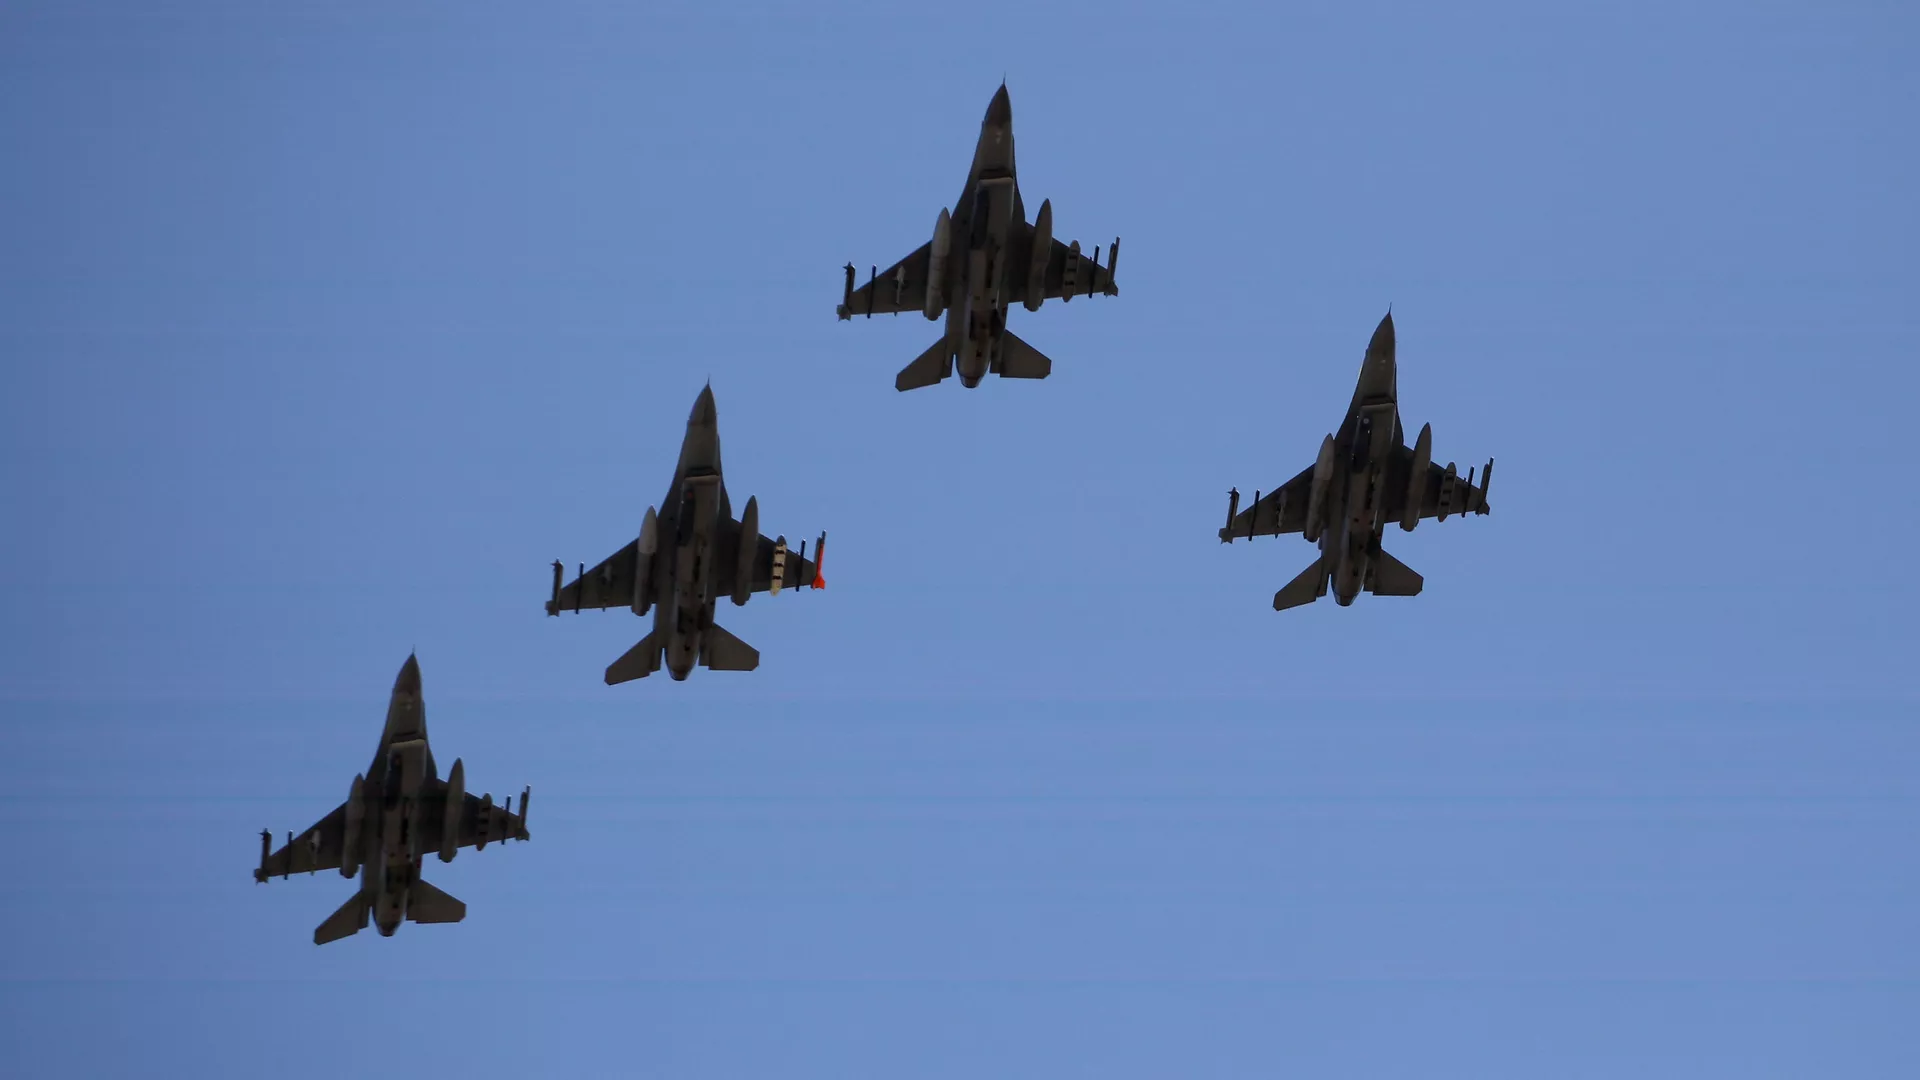 dia: A U.S. Air Force F-16 fighter jet crashed during training in South Korea